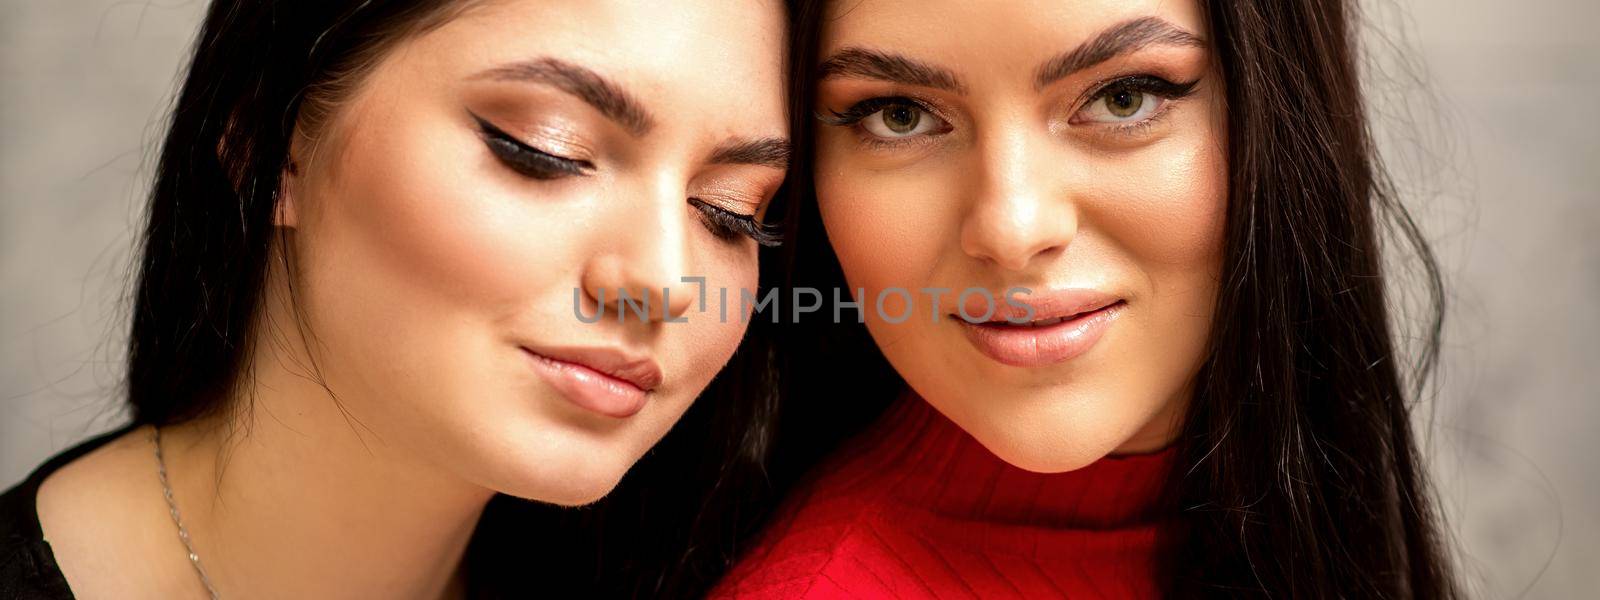 Two fashionable young women. Portrait of the two beautiful female models with long hair and makeup. Two beauty young caucasian women with a black hairstyle on the background of a gray wall